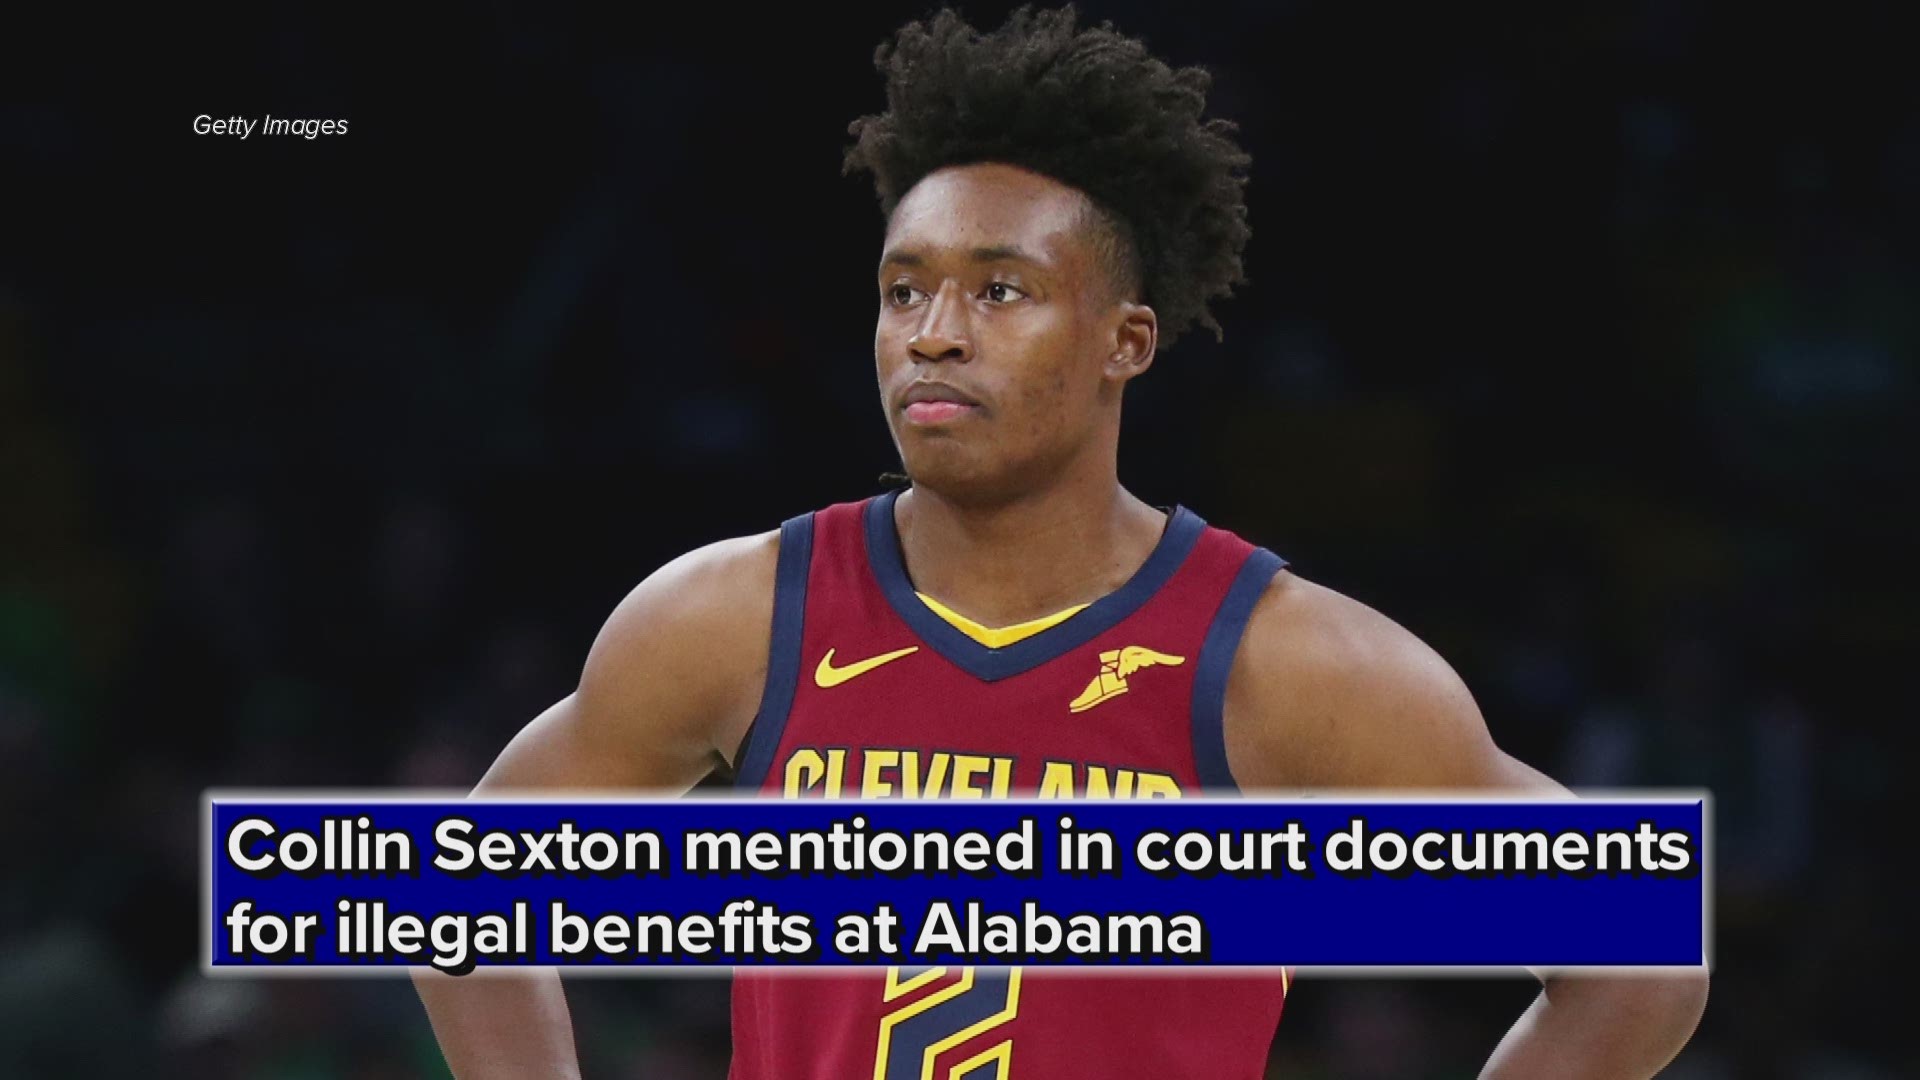 Cleveland Cavaliers PG Collin Sexton mentioned in court documents for illegal benefits at Alabama